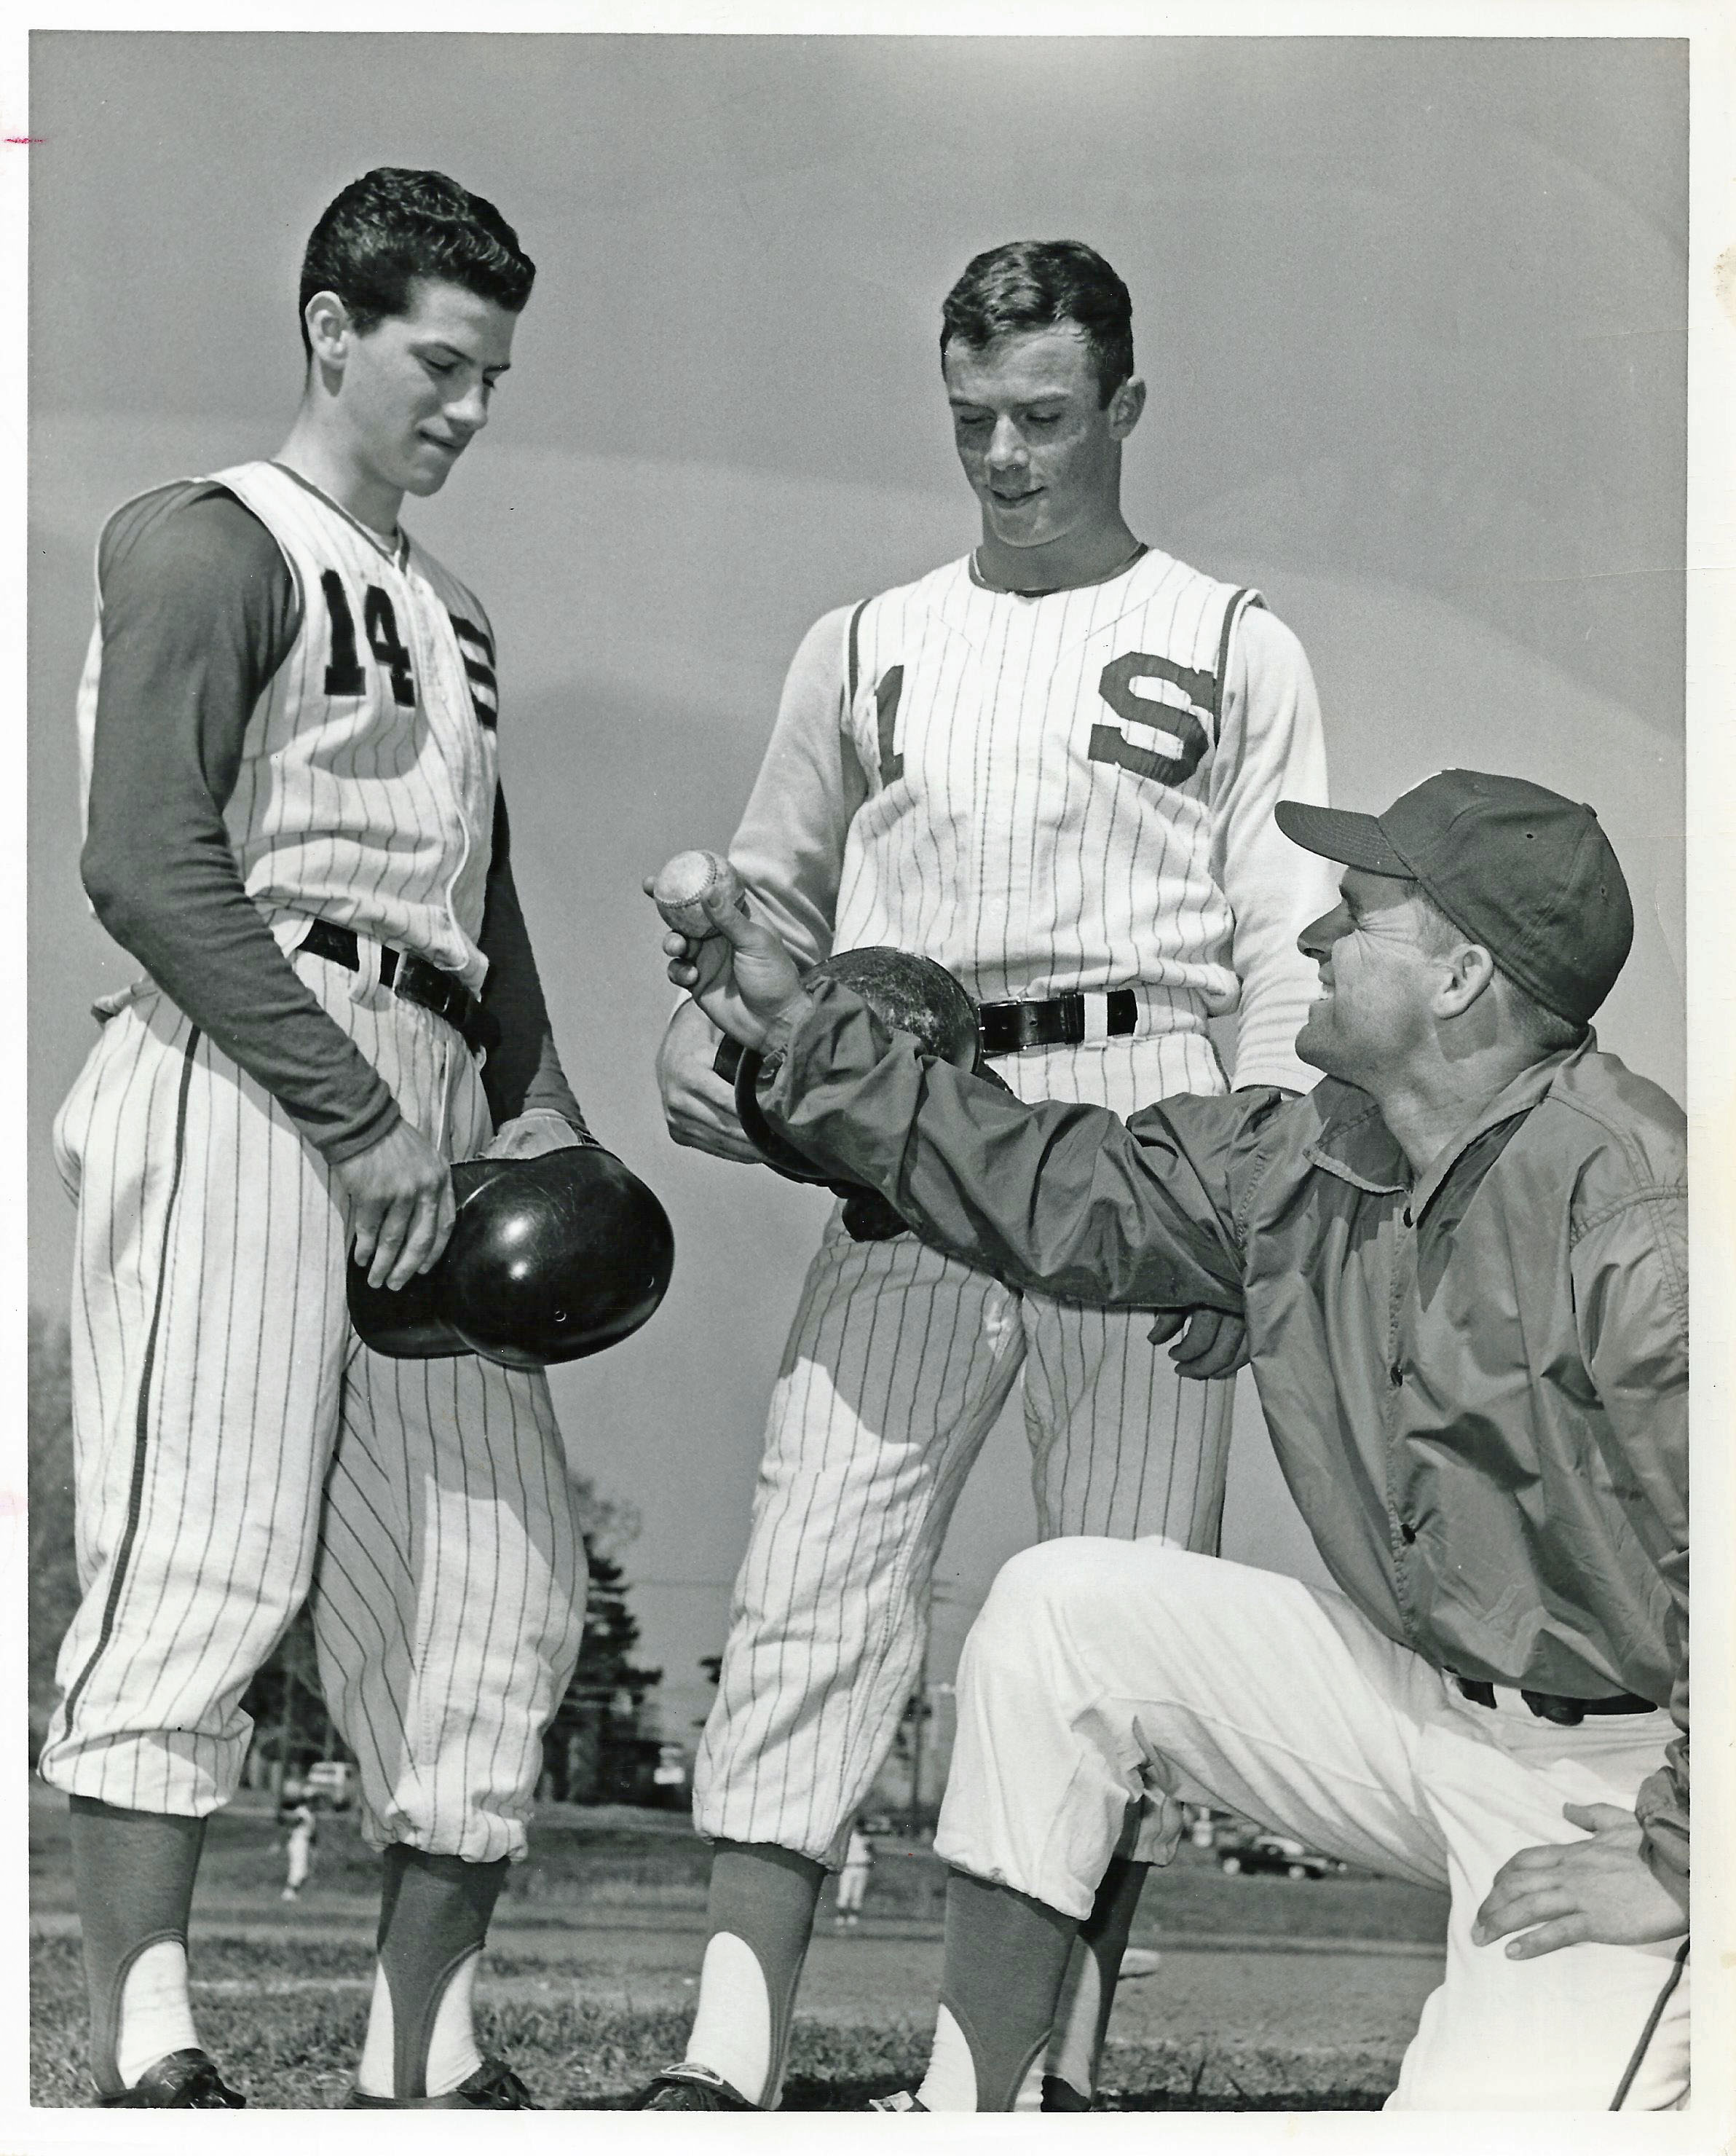 Coach Ed Bryant, Butch Breniser and Johnny Francis